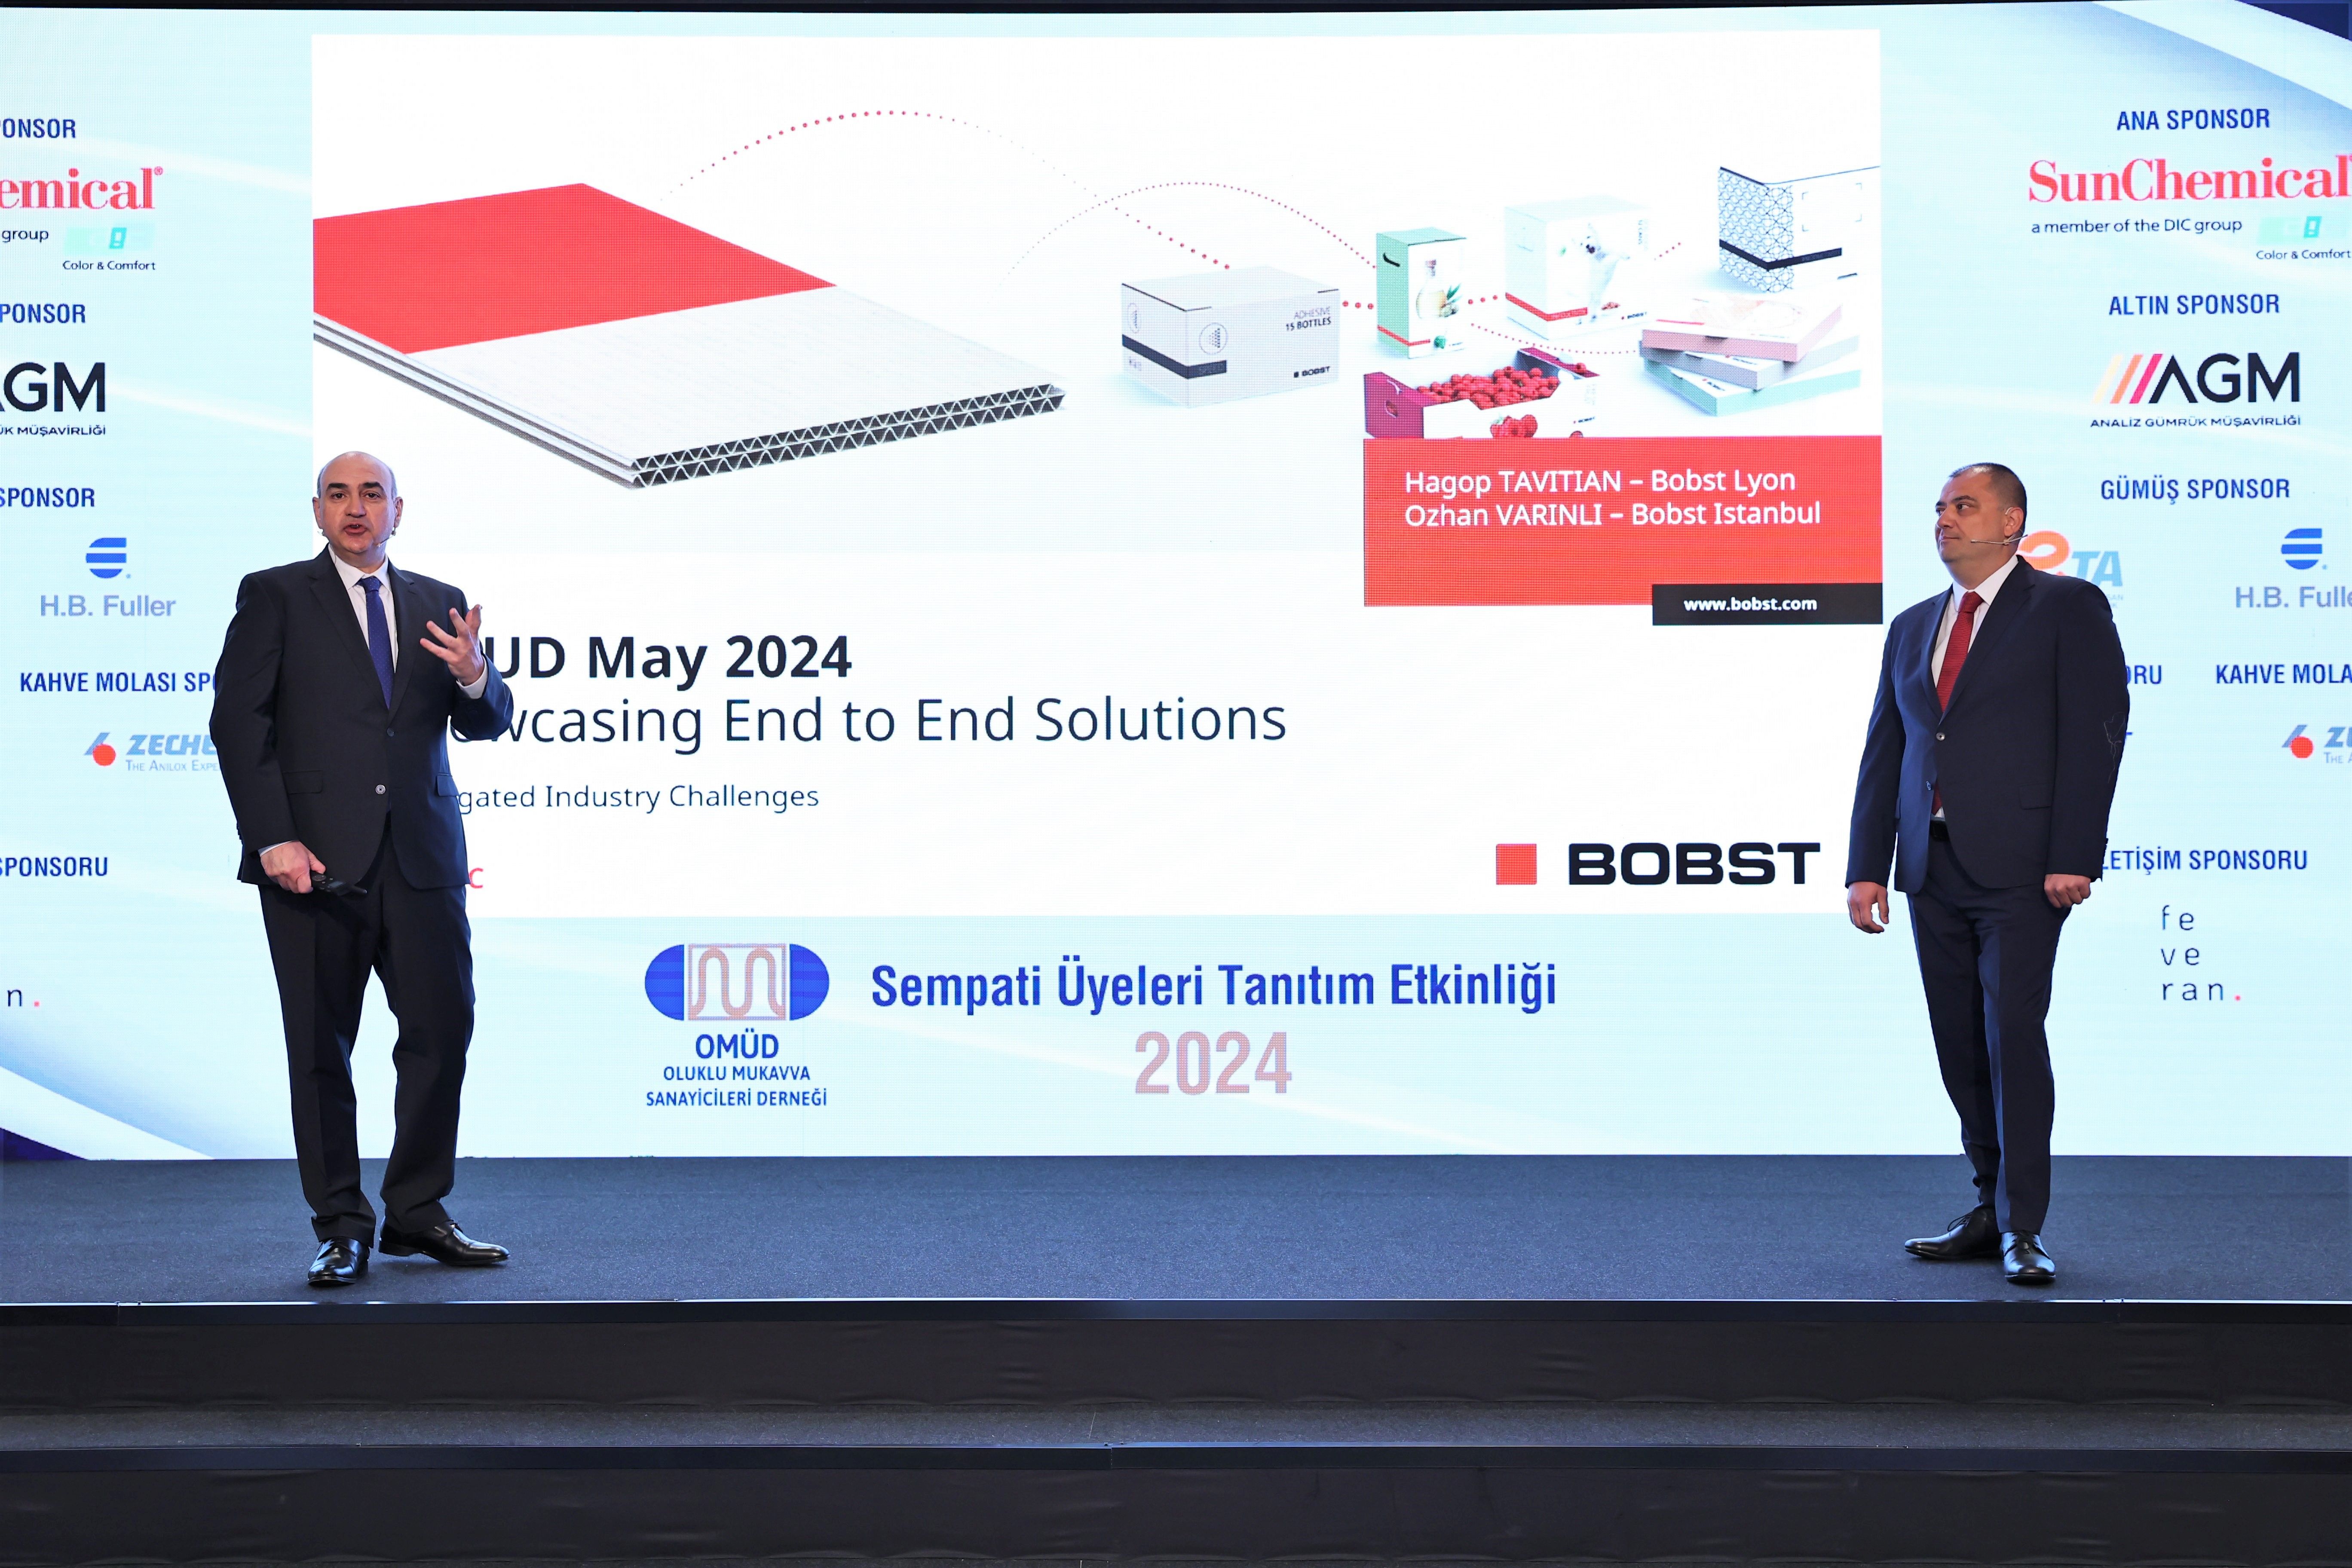 From left to right: Hagop Tavitian, Technology Sales Manager, Bobst Lyon - Özhan Varinli, Zone Business Director, Bobst Istanbul